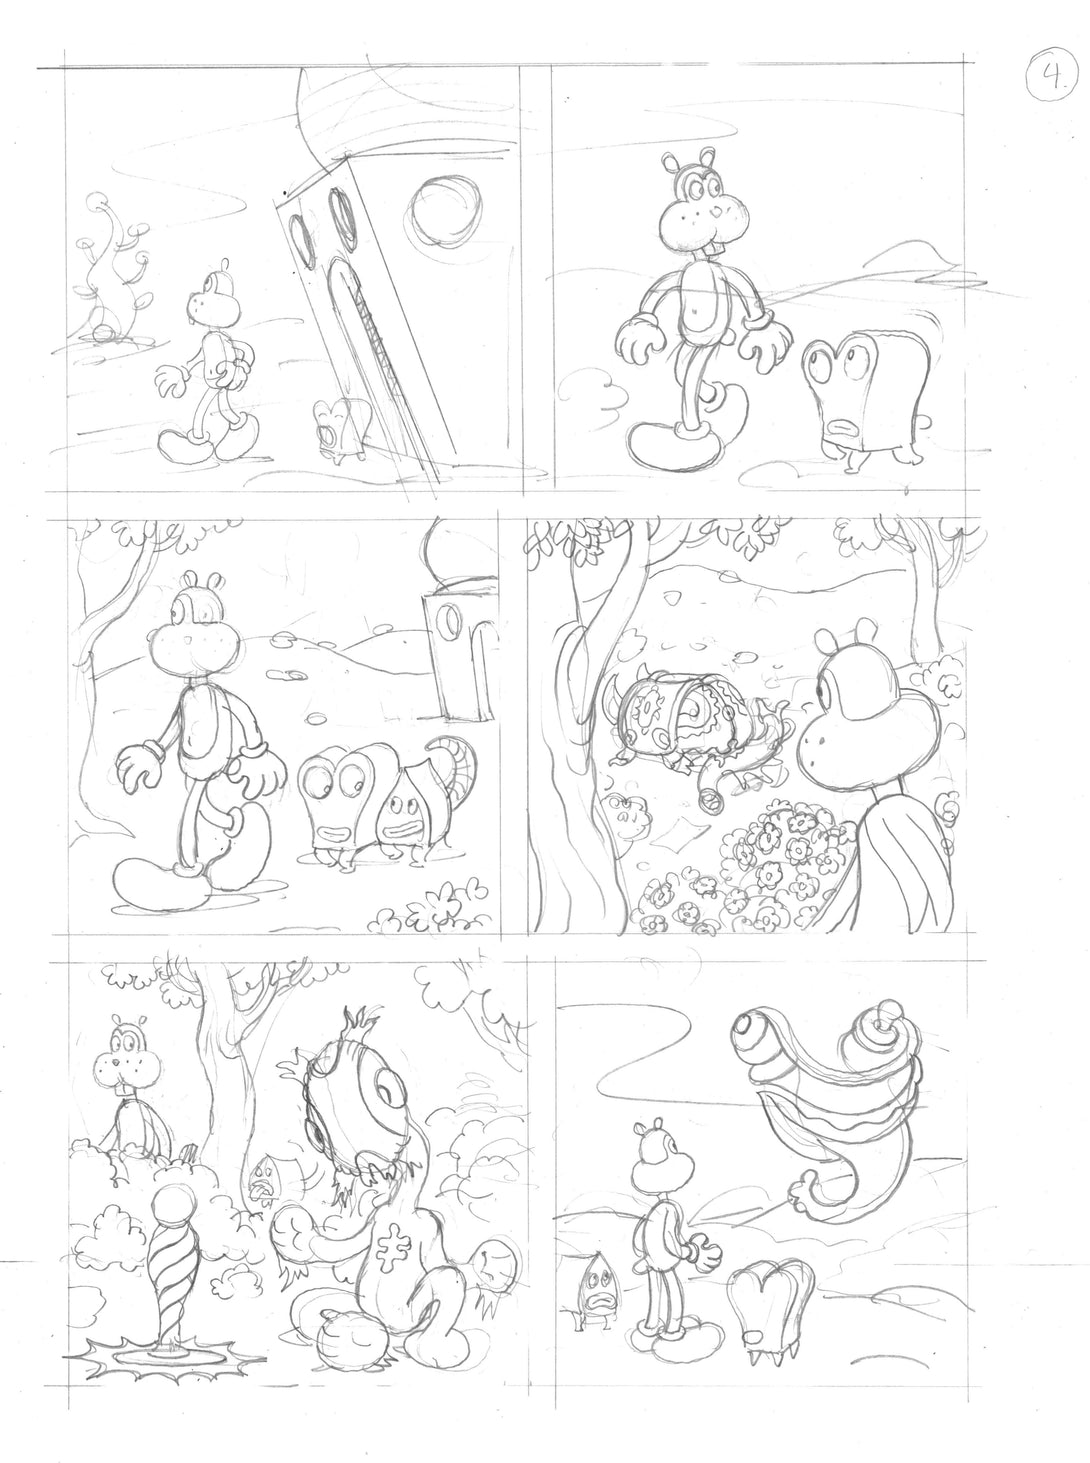 zPenciled unused FRANK page ready-to-ink.